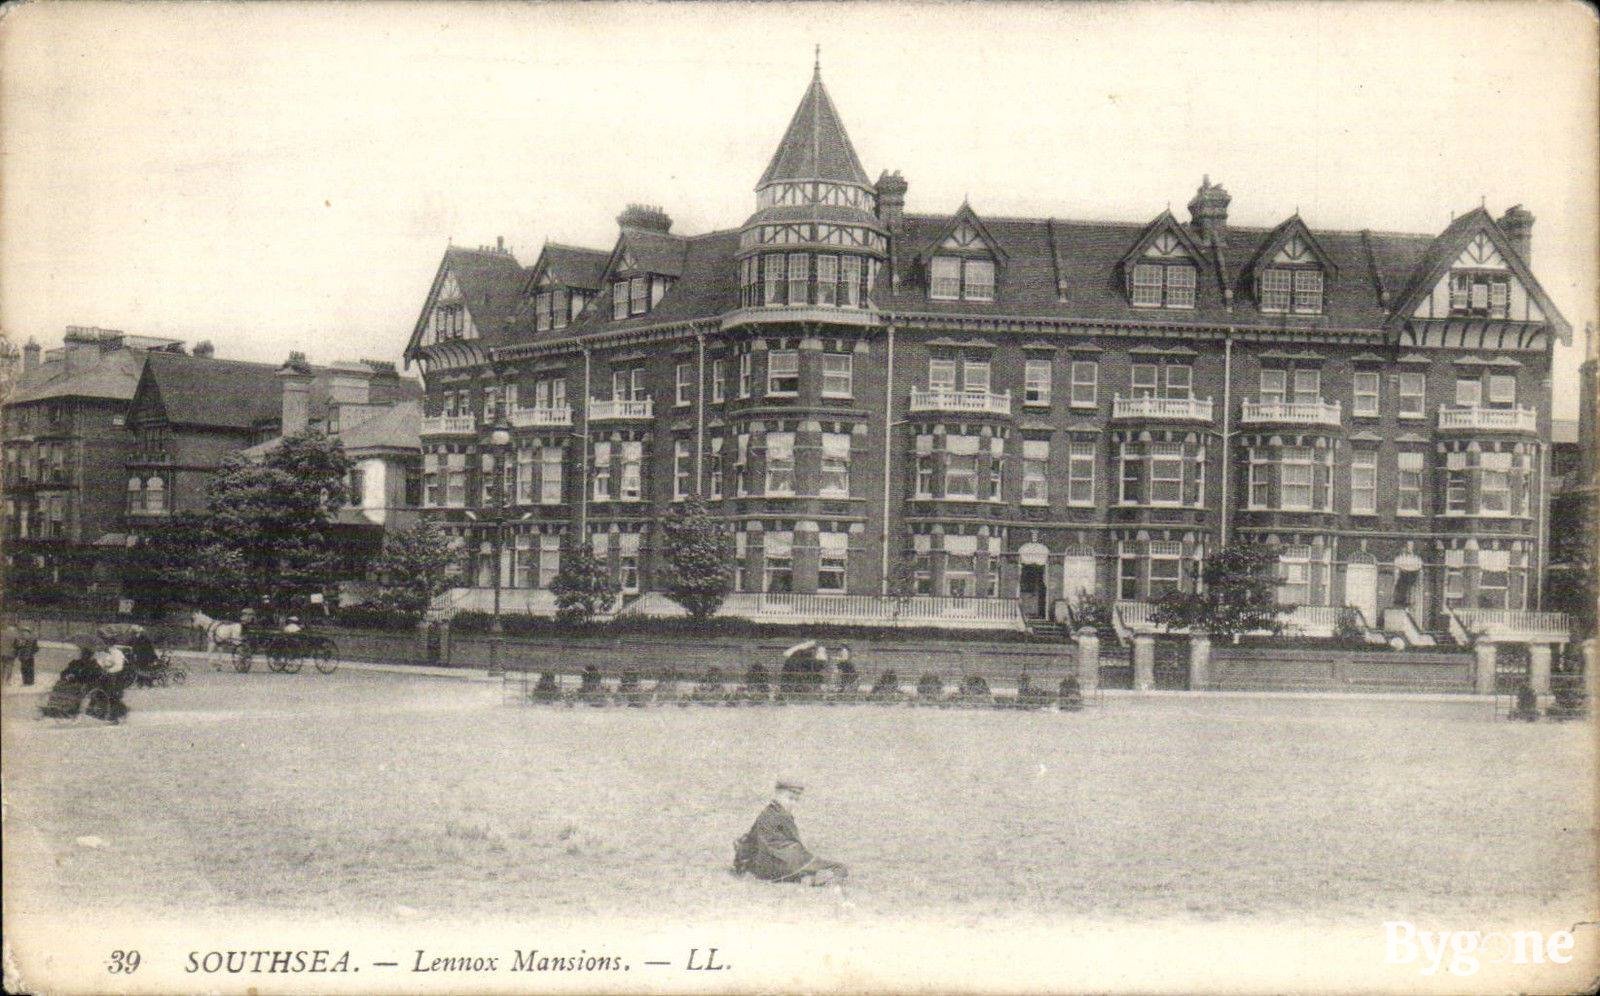 Lennox Mansions, Southsea Common